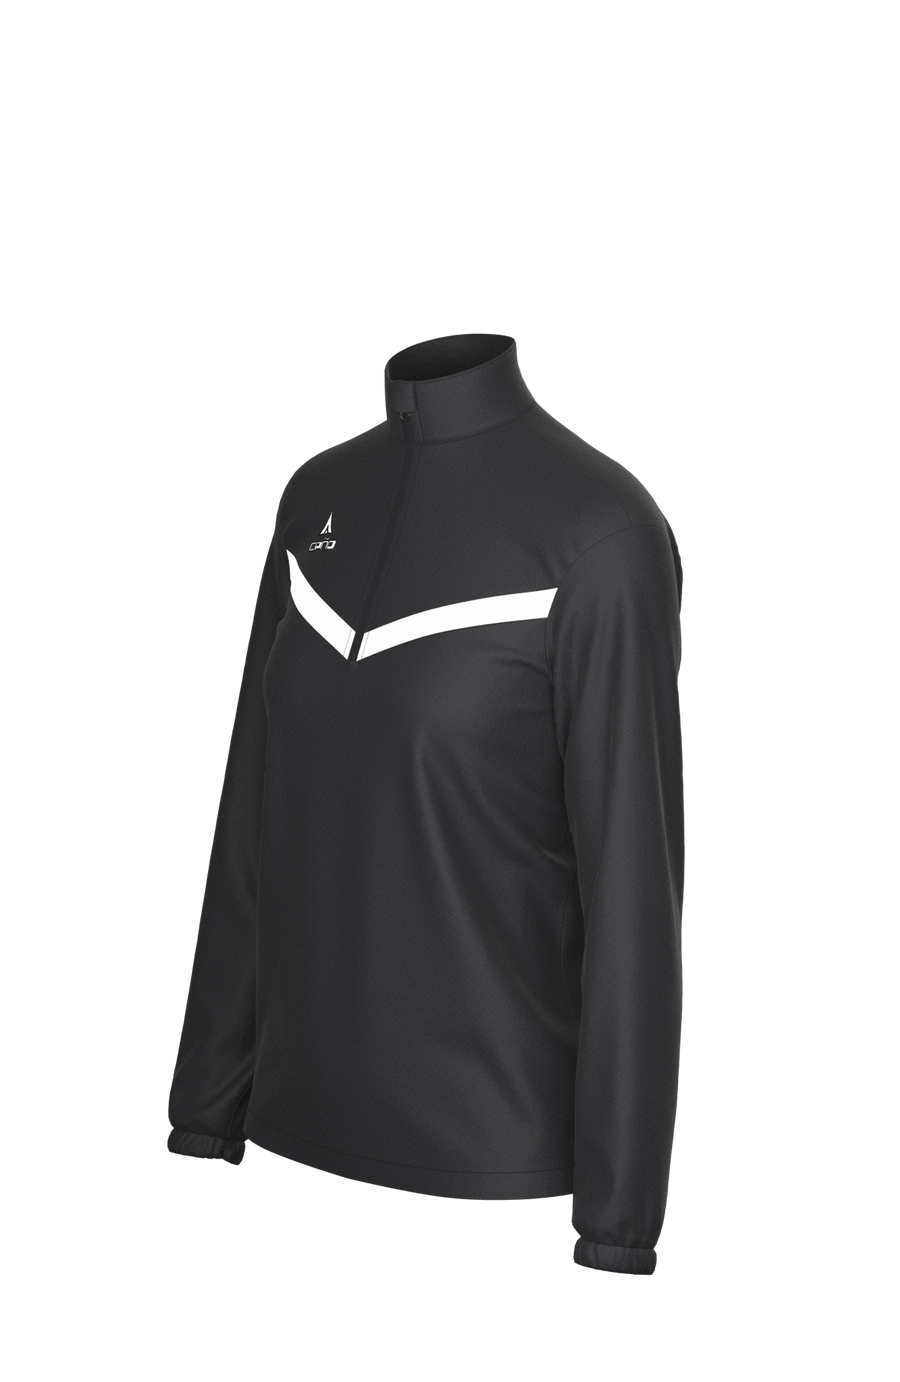 Caño - Women’s 1/4 Zip V-Design Jacket (Fitted) - Clay Soccer